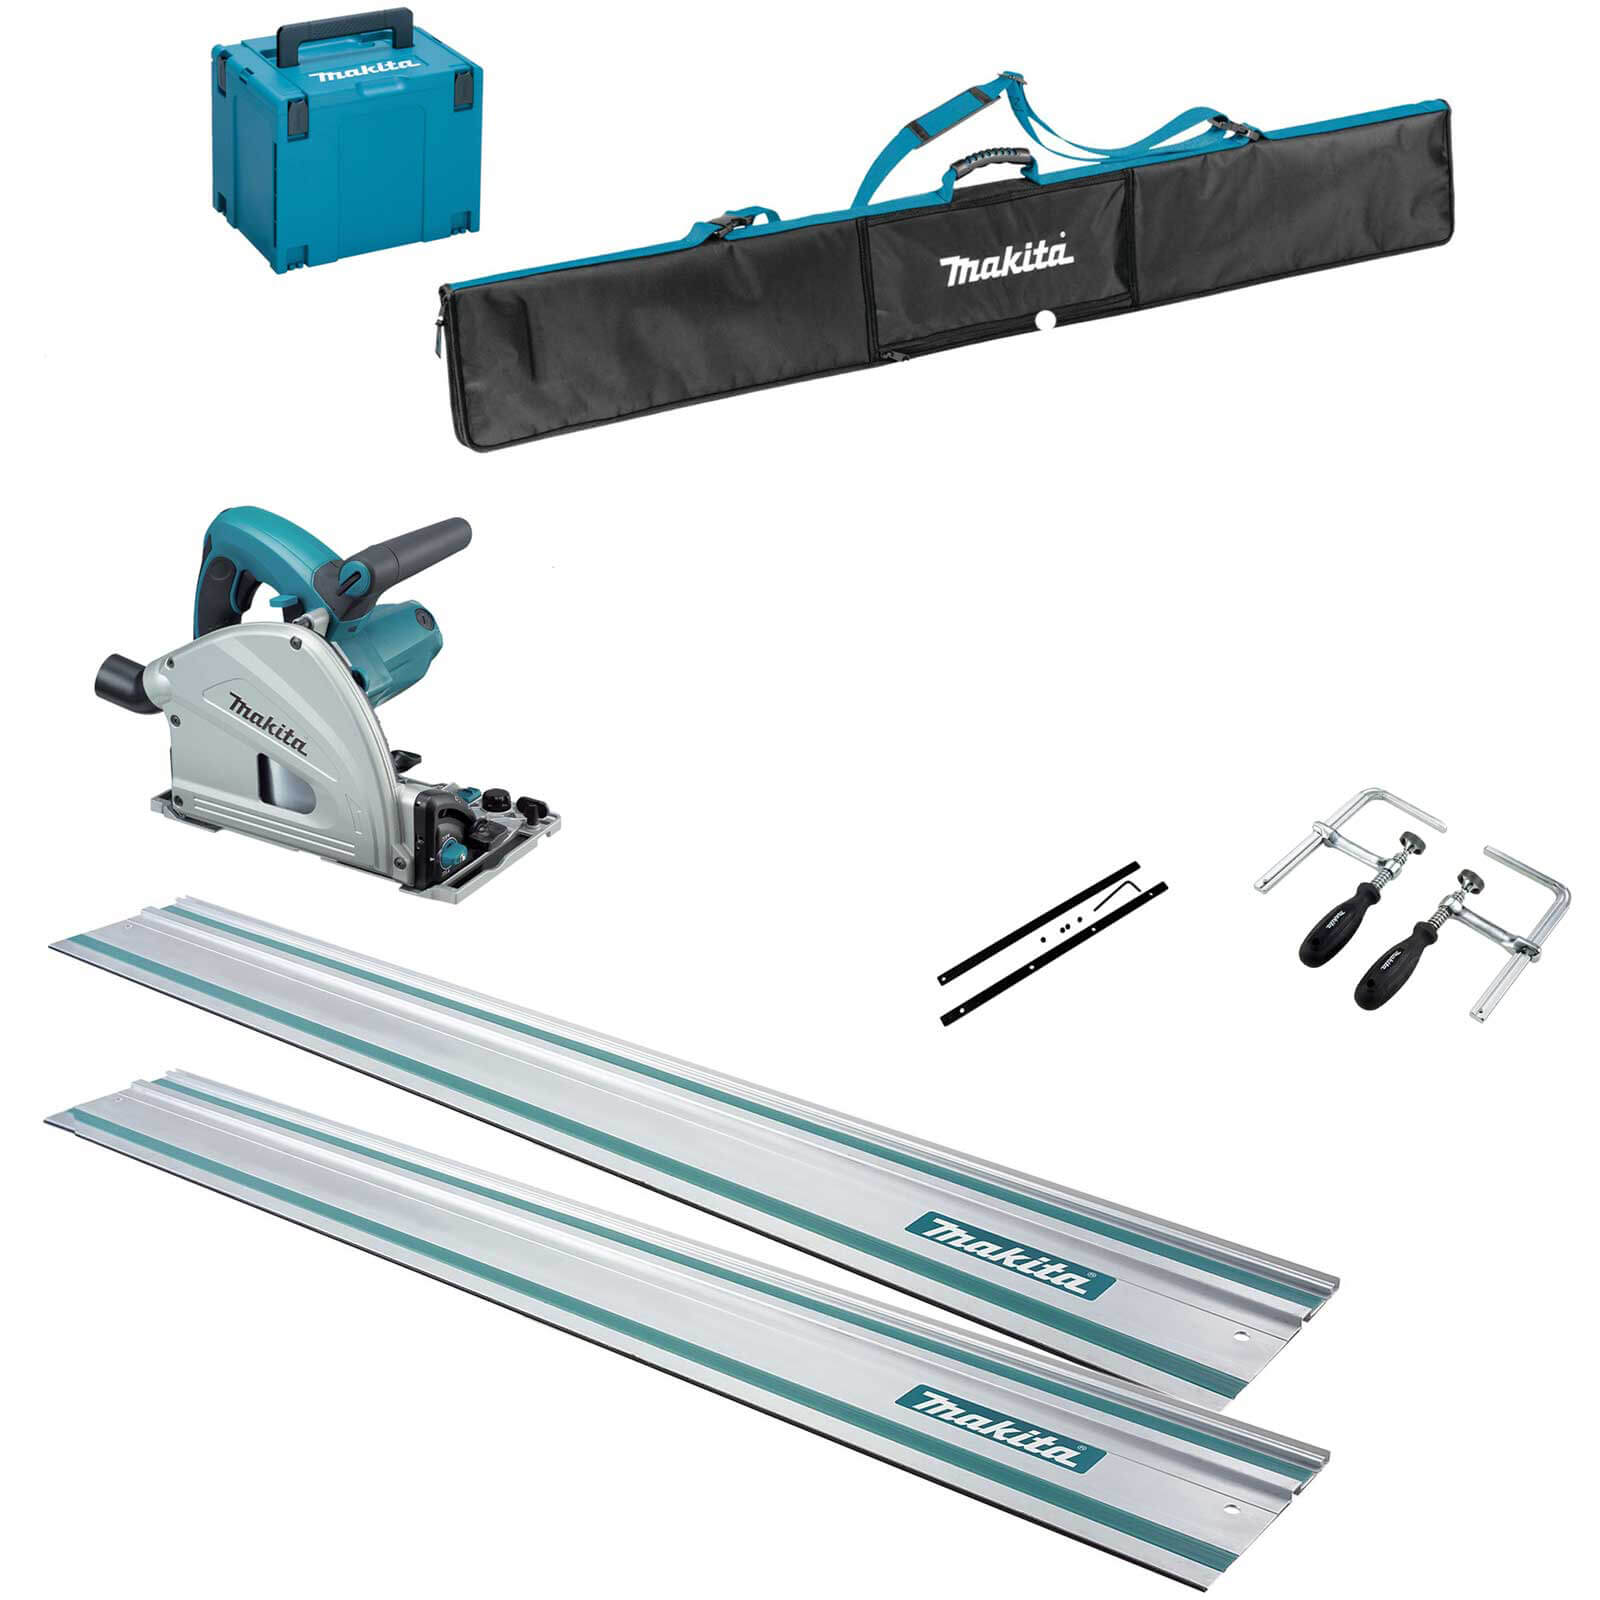 Image of Makita SP6000K6 Plunge Cut Circular Saw and Guide Rail Accessory 6 Piece Set 240v